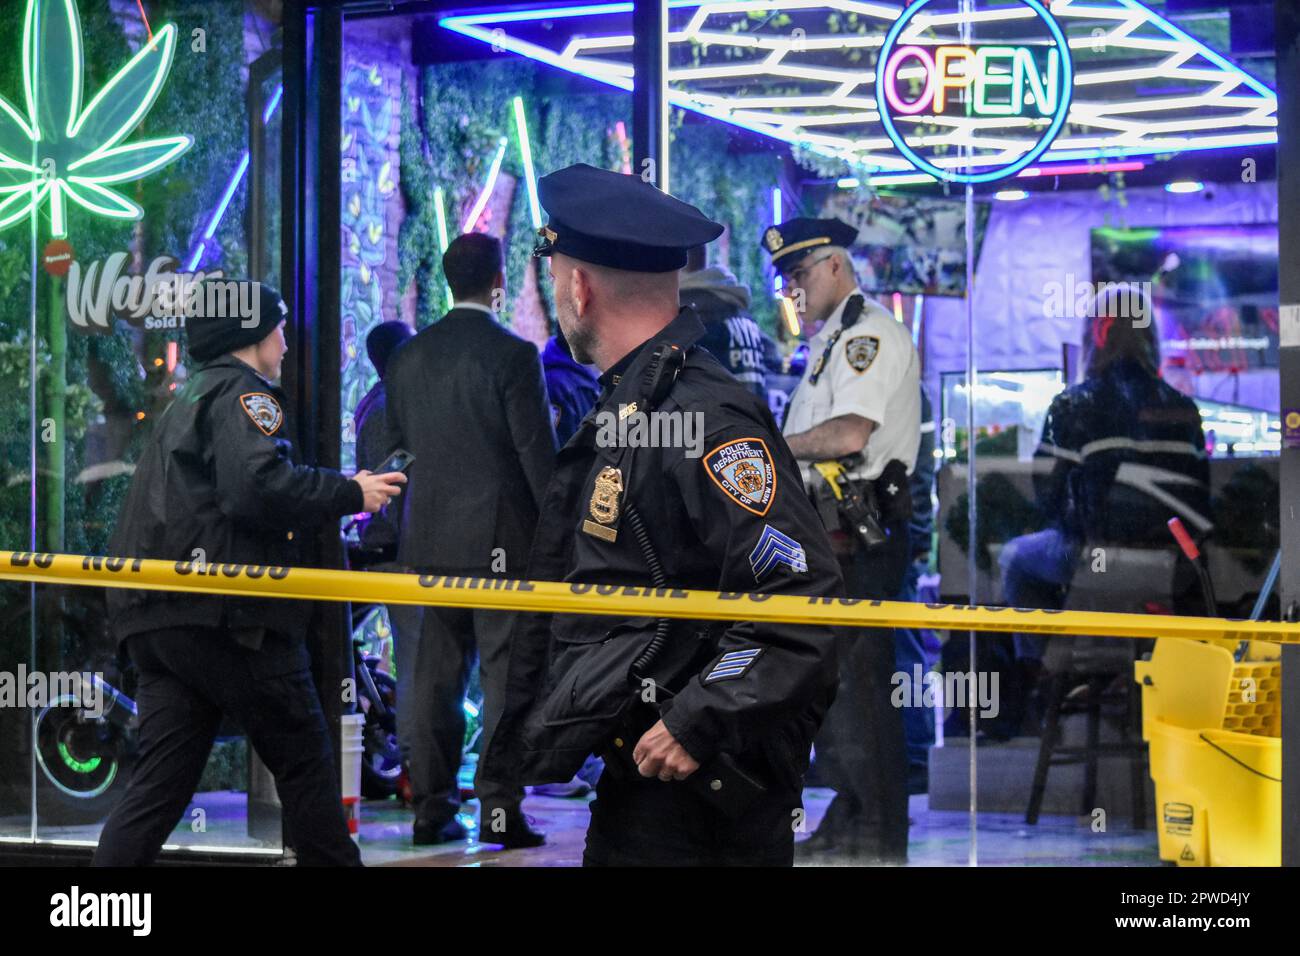 Manhattan, United States. 29th Apr, 2023. Police officers seen during the investigation. Police investigate the shooting incident. Shooting in Manhattan, New York, United States on April 29, 2023. At 17:43 Saturday evening one person was shot in the hip and shoulder near the area of 9th Avenue and West 46th Street. According to the New York City Police Department, the person shot is in stable condition. No suspects are captured at this time. (Photo by Kyle Mazza/SOPA Images/Sipa USA) Credit: Sipa USA/Alamy Live News Stock Photo